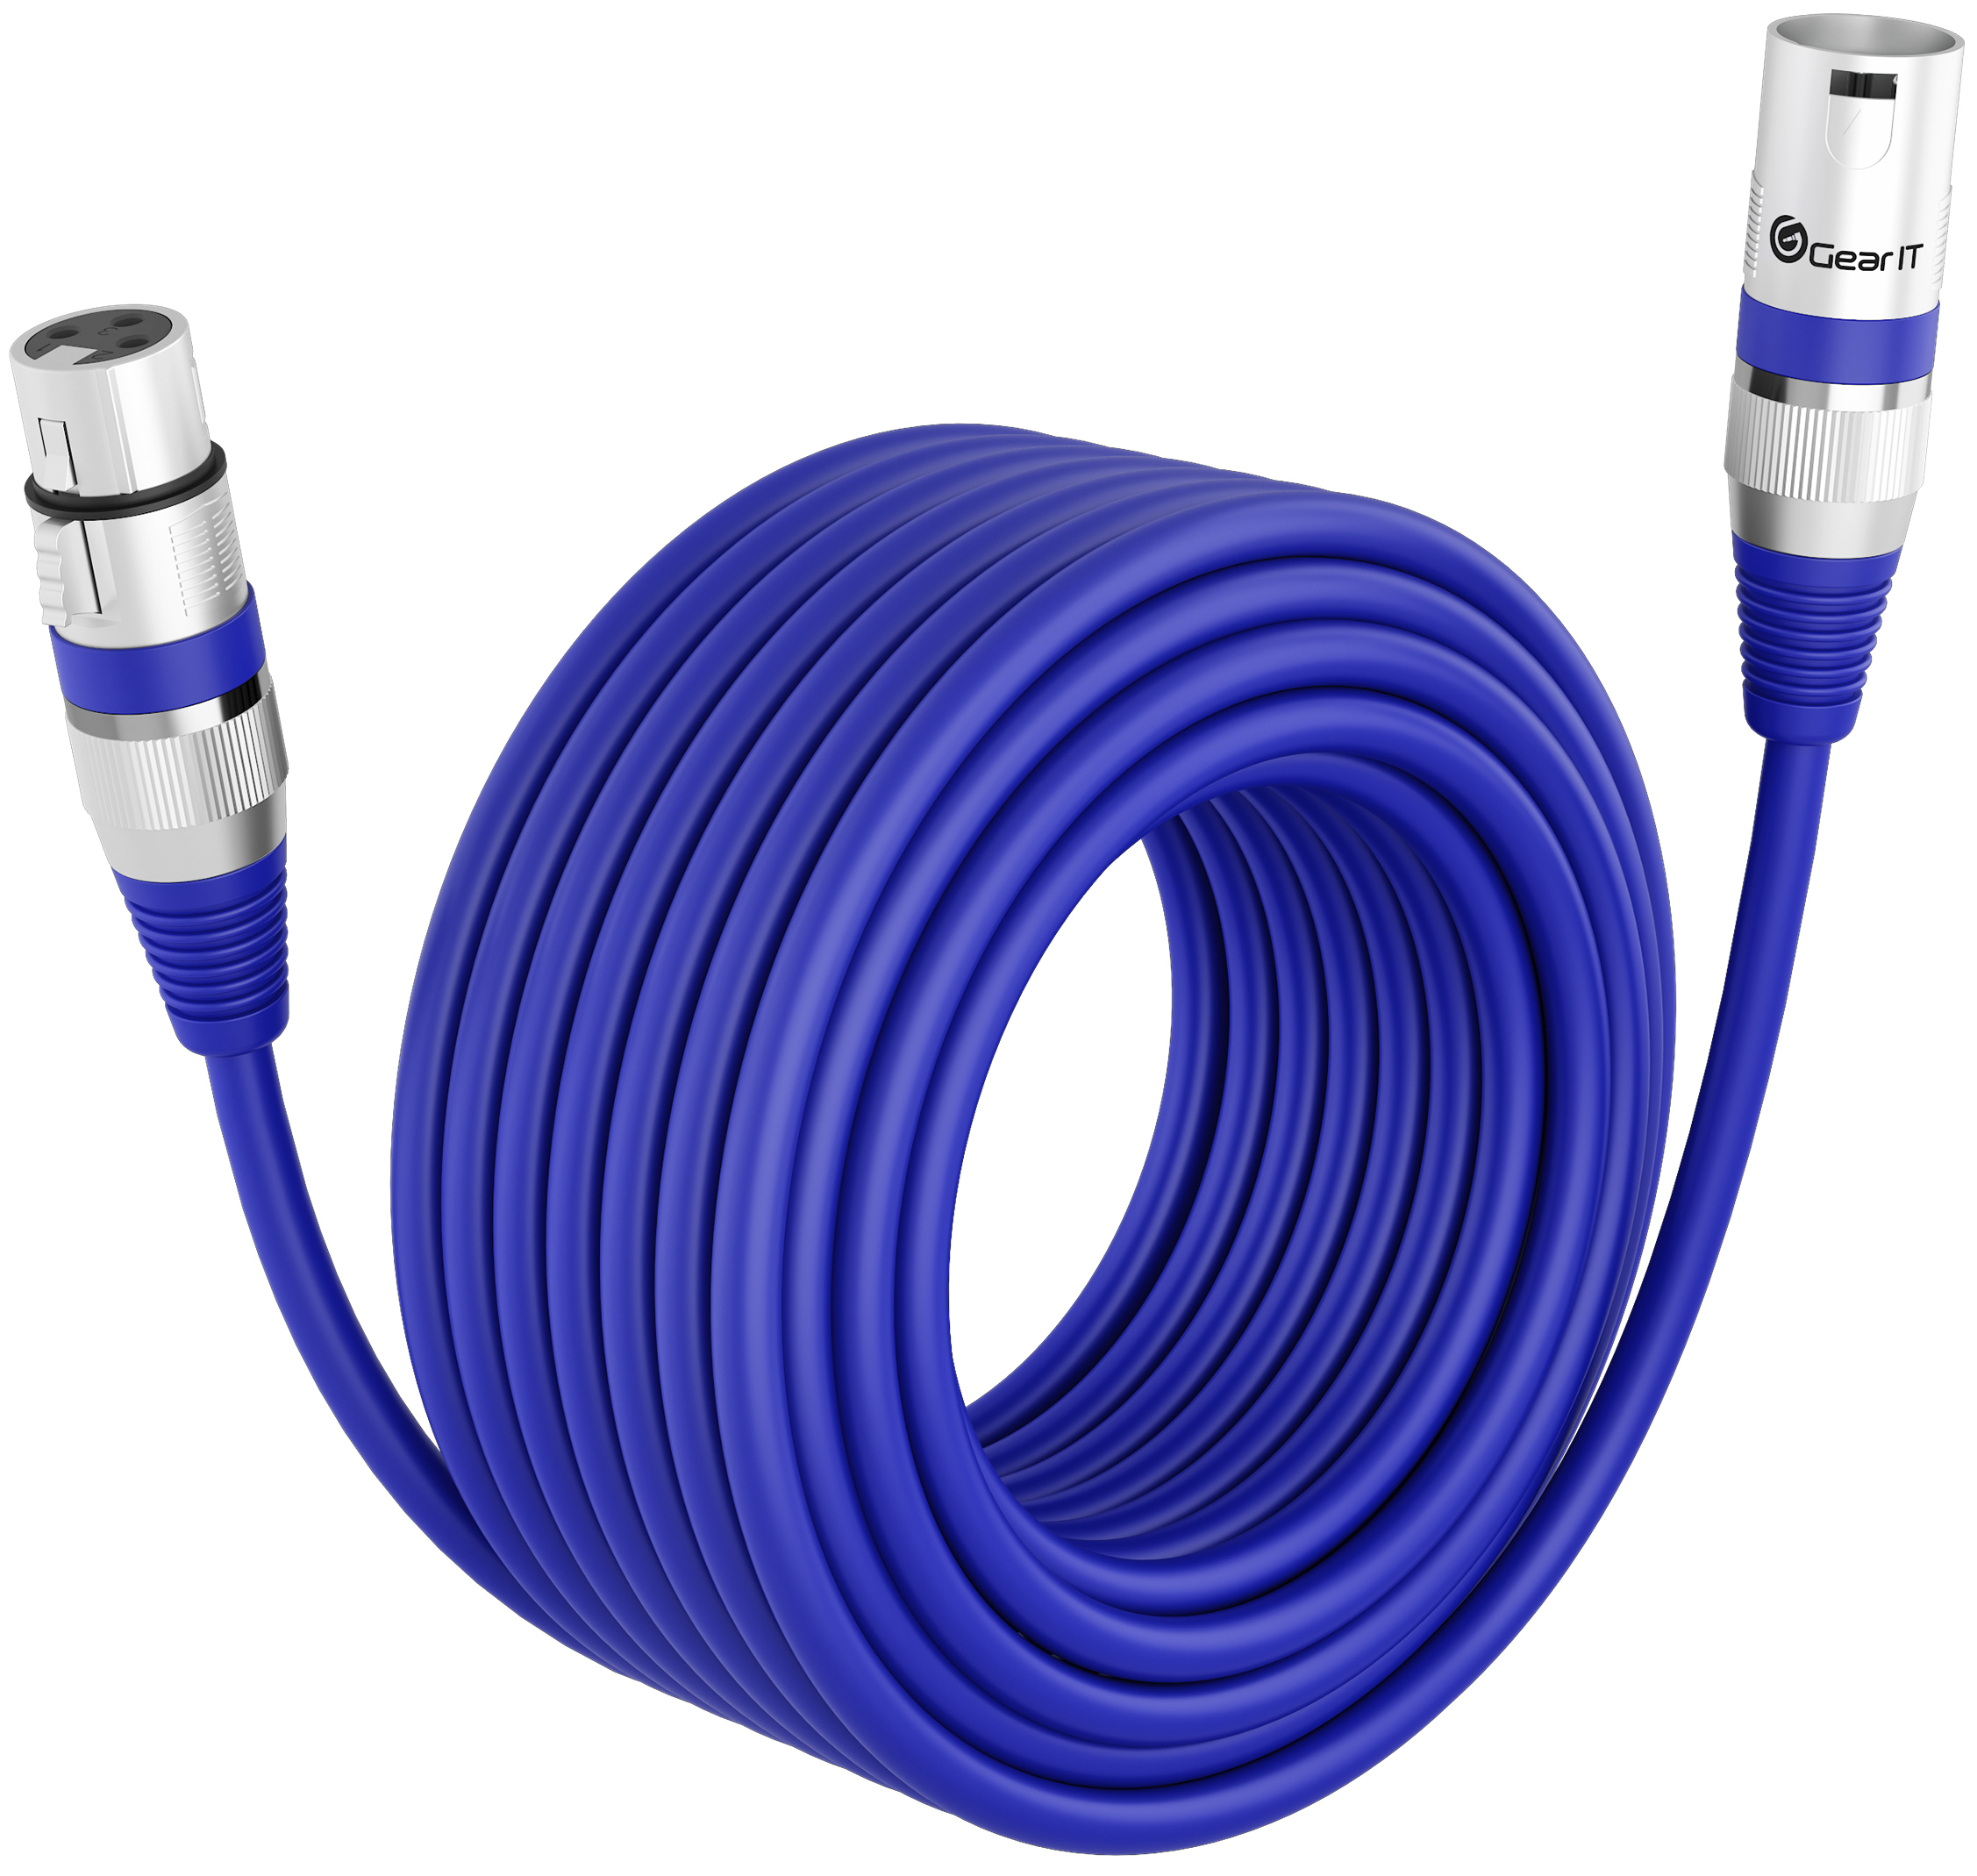 GearIT XLR to XLR Microphone Cable (100 Feet, 1 Pack) XLR Male to Female Mic Cable 3-Pin Balanced Shielded XLR Cable for Mic Mixer, Recording Studio, Podcast - Blue, 100Ft, 1 Pack - image 1 of 7